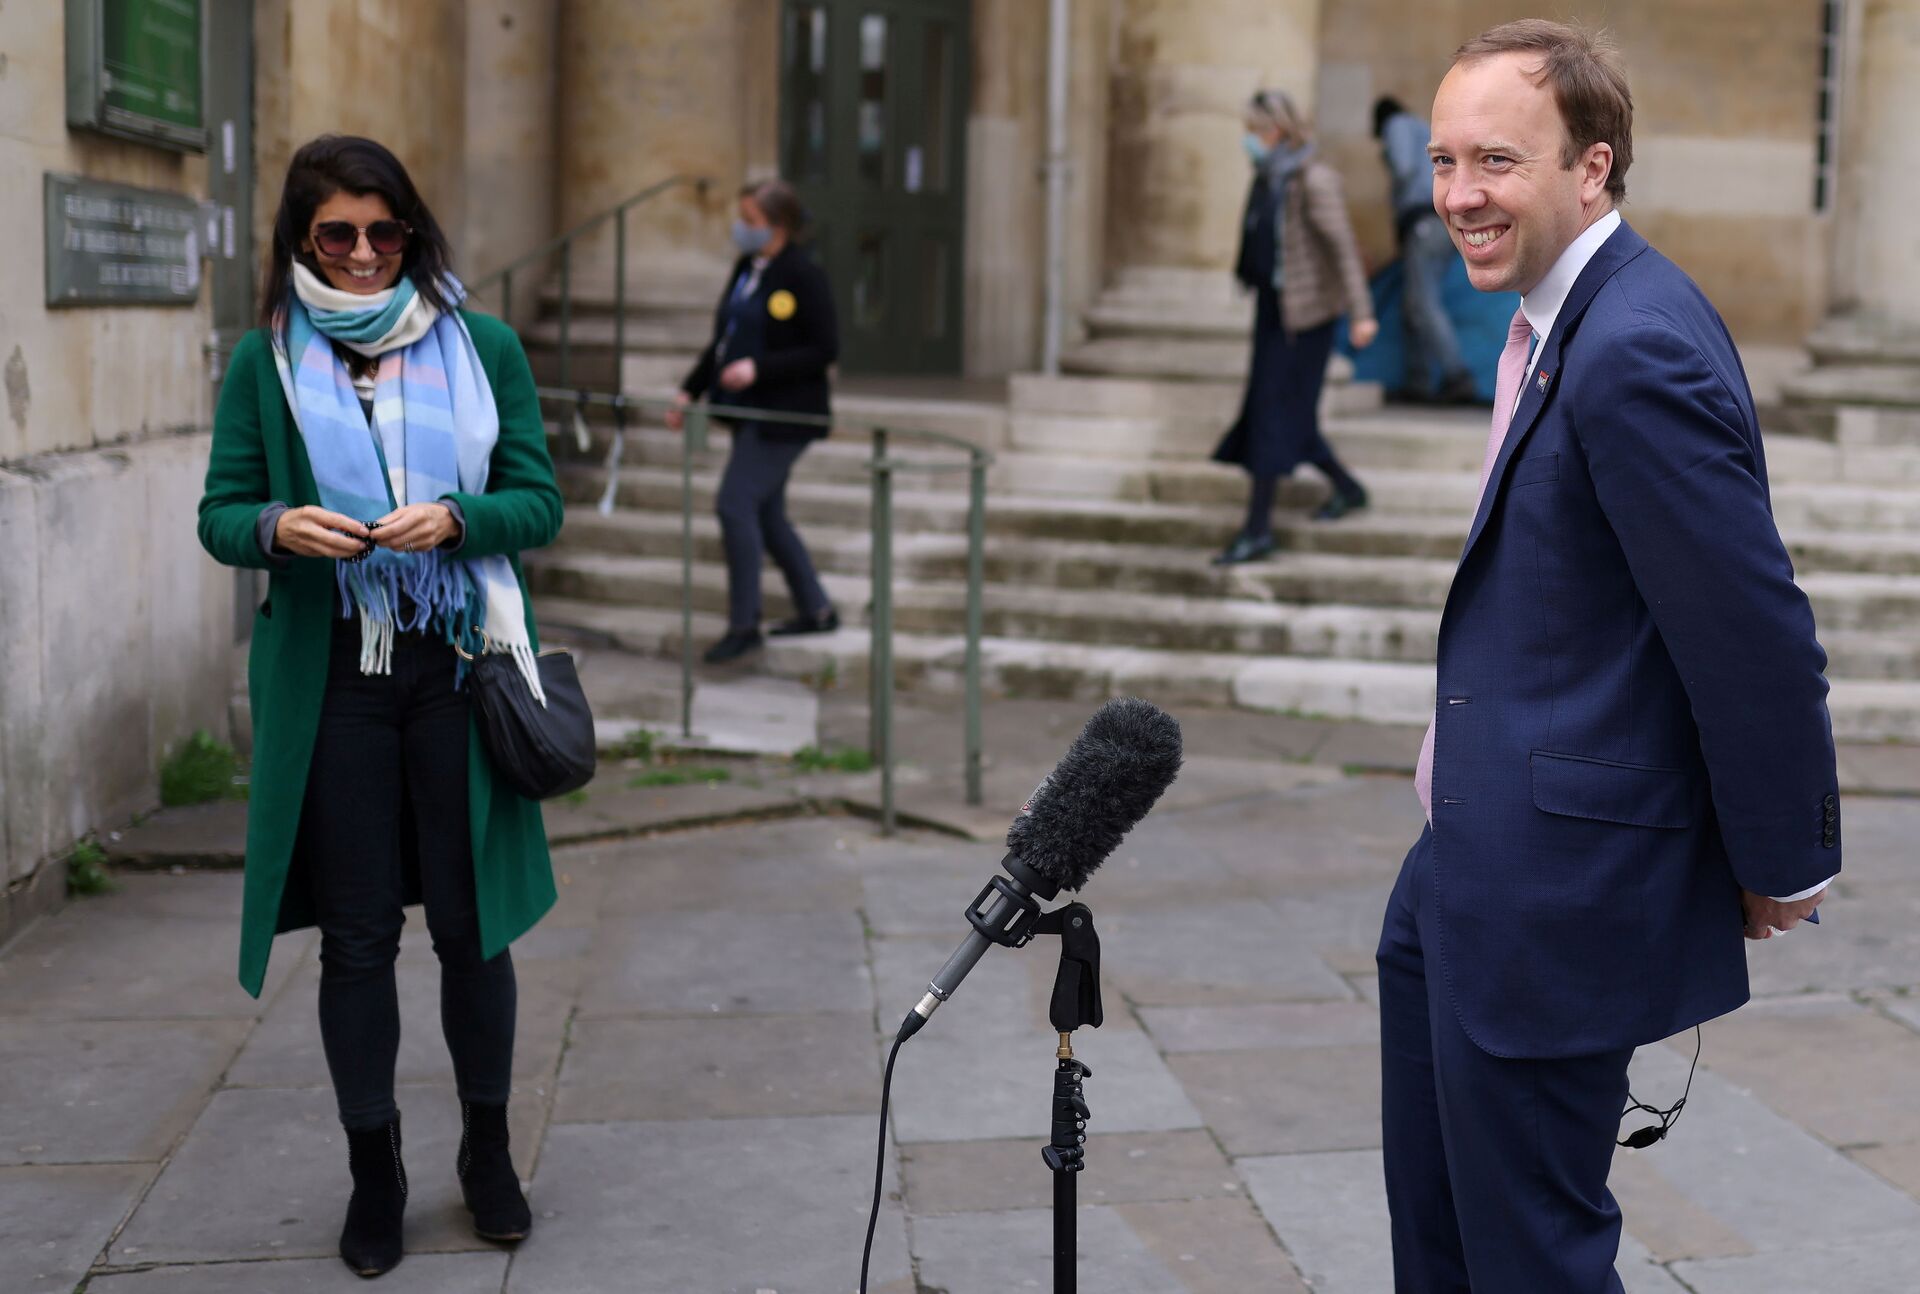 Britain's Health Secretary Matt Hancock smiles during a television interview as his aide Gina Coladangelo looks on, outside BBC's Broadcasting House in London - Sputnik International, 1920, 07.09.2021